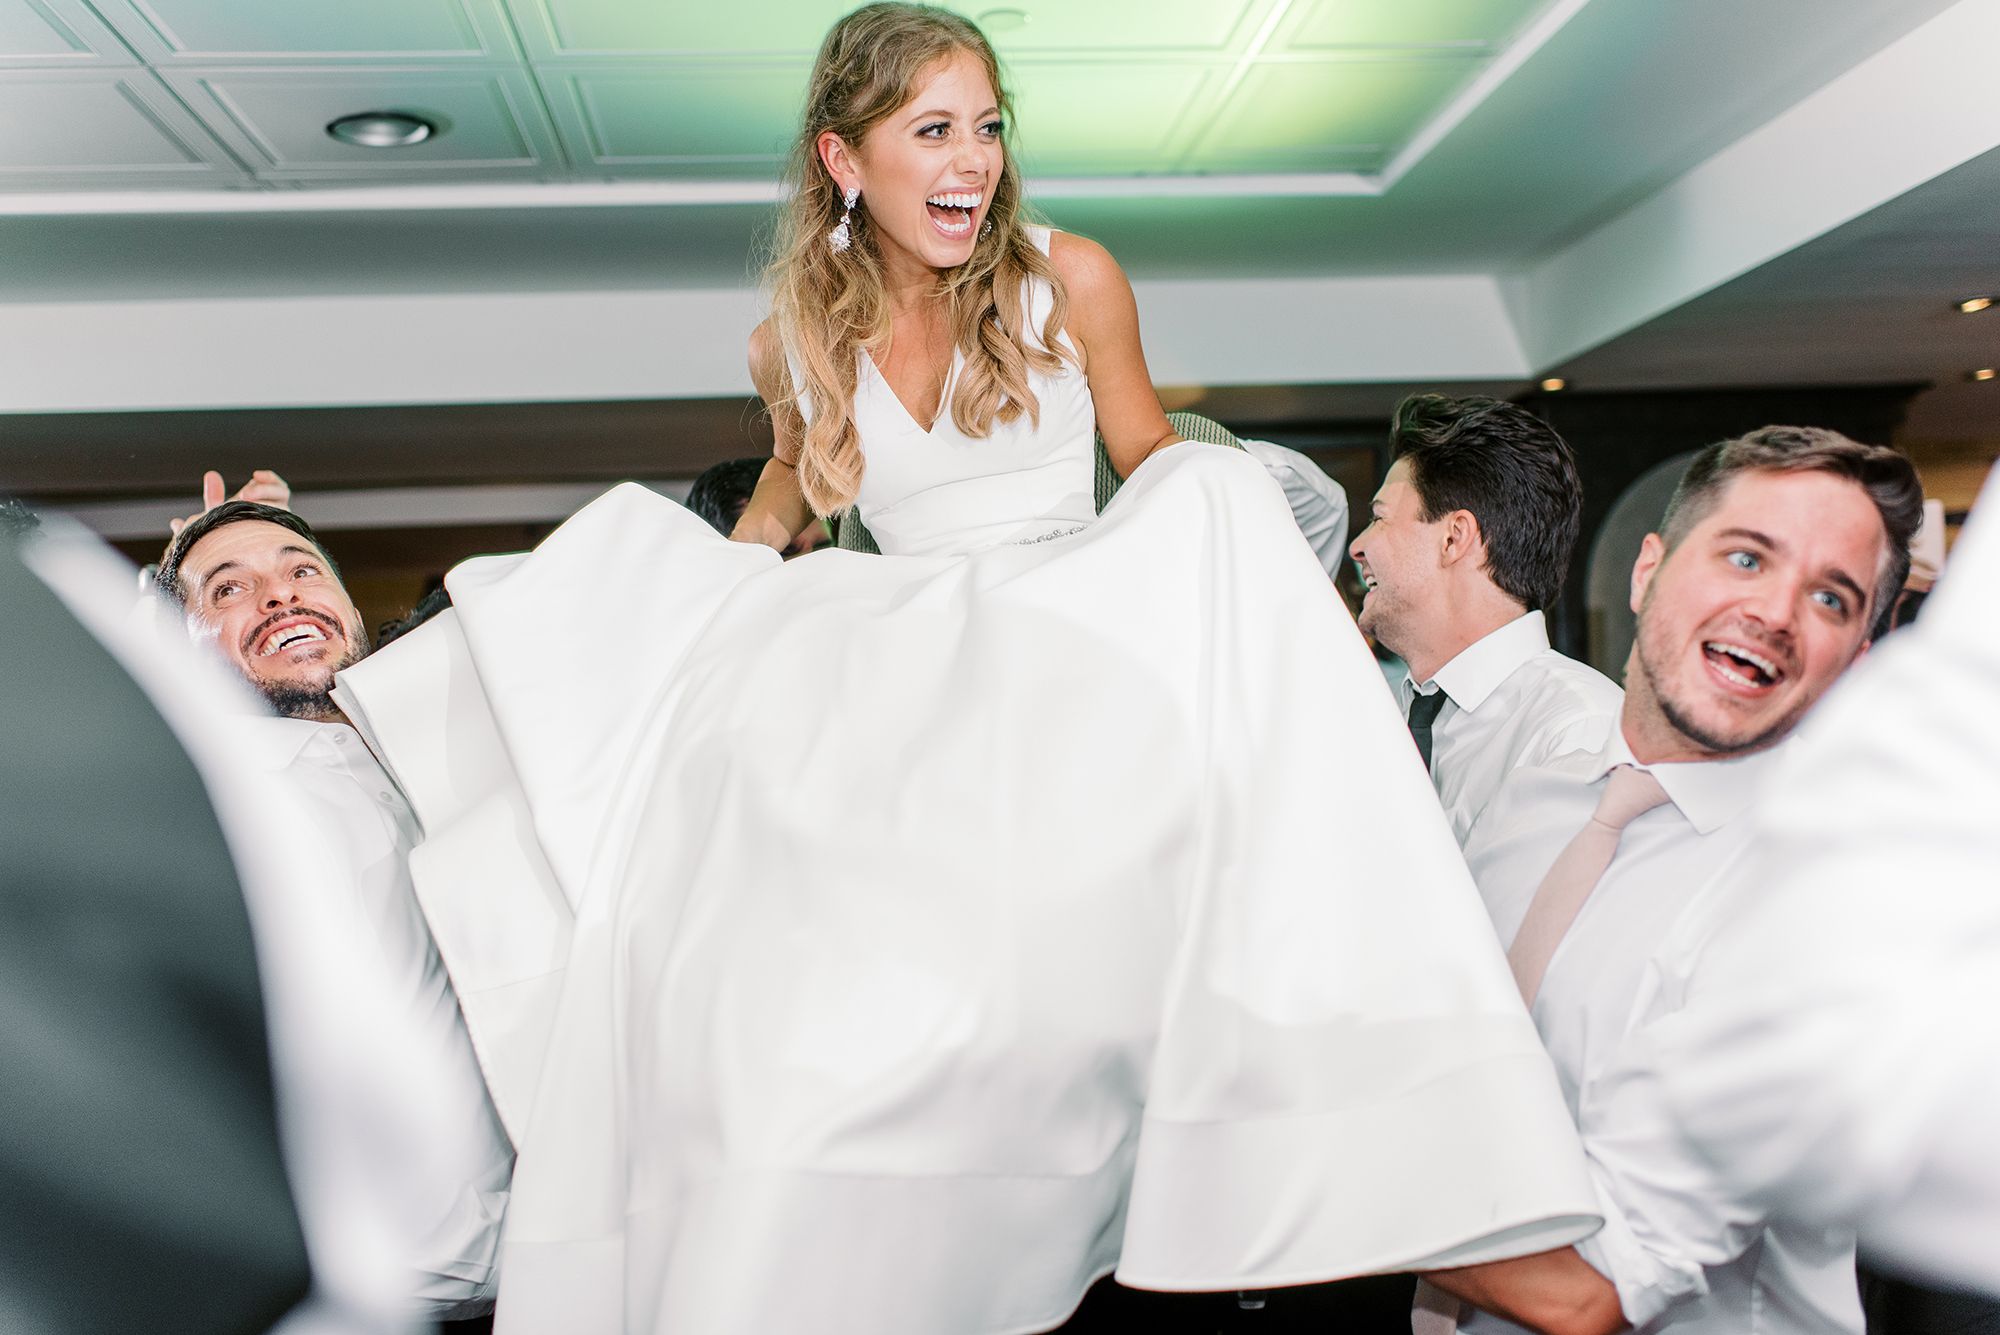 The bride smiling as her wedding guests lift her in a chair at the reception party.